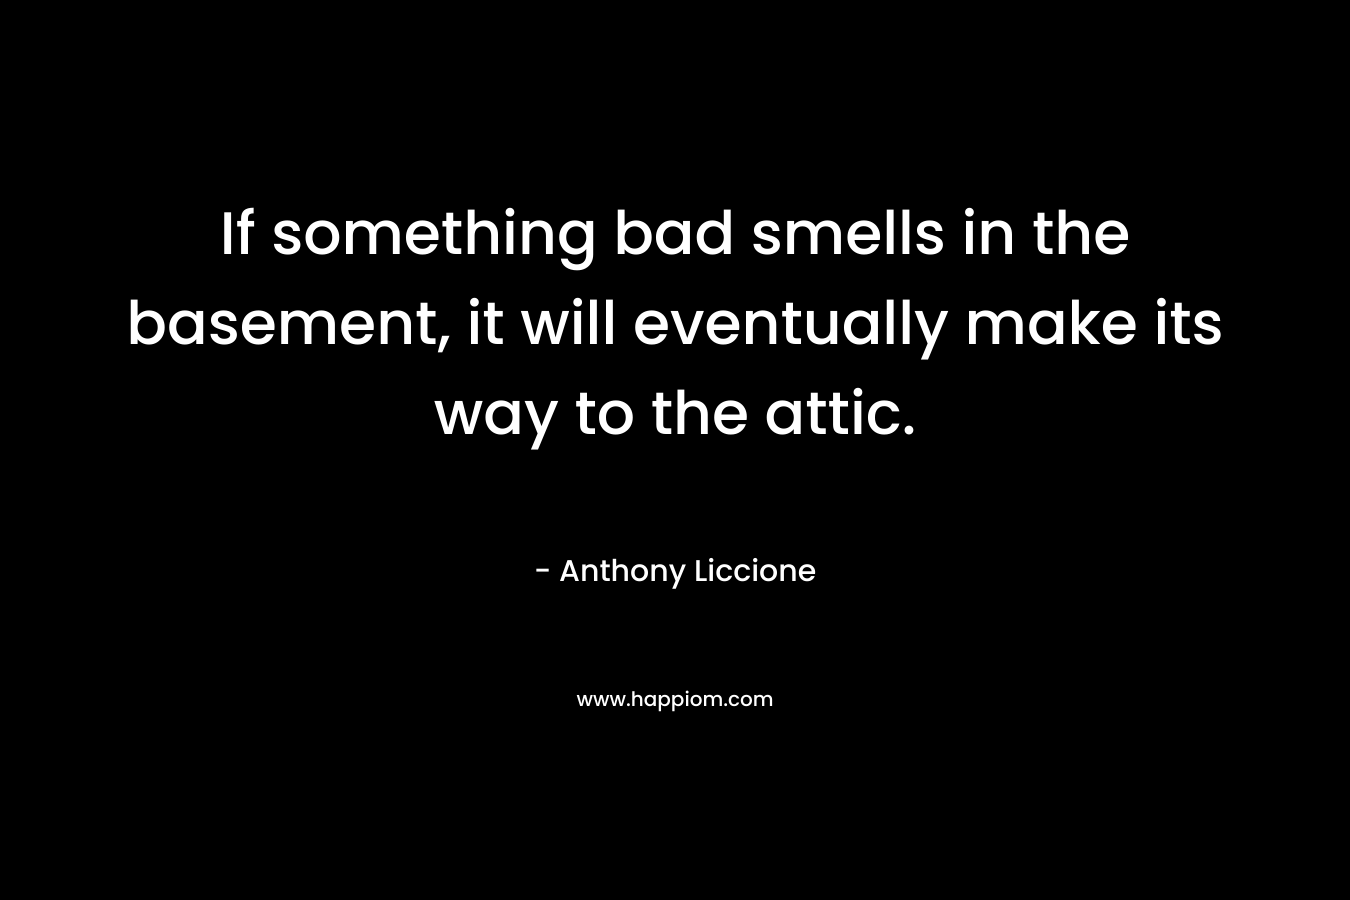 If something bad smells in the basement, it will eventually make its way to the attic.